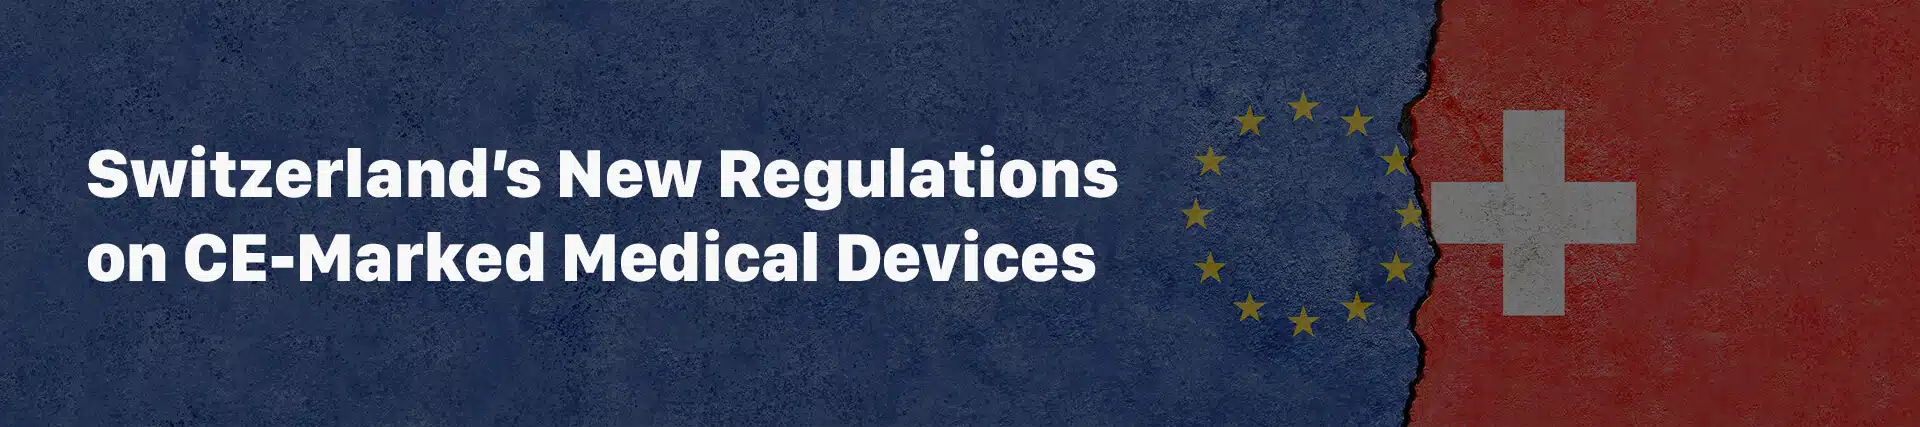 Switzerland’s New Regulations on CE-Marked Medical Devices